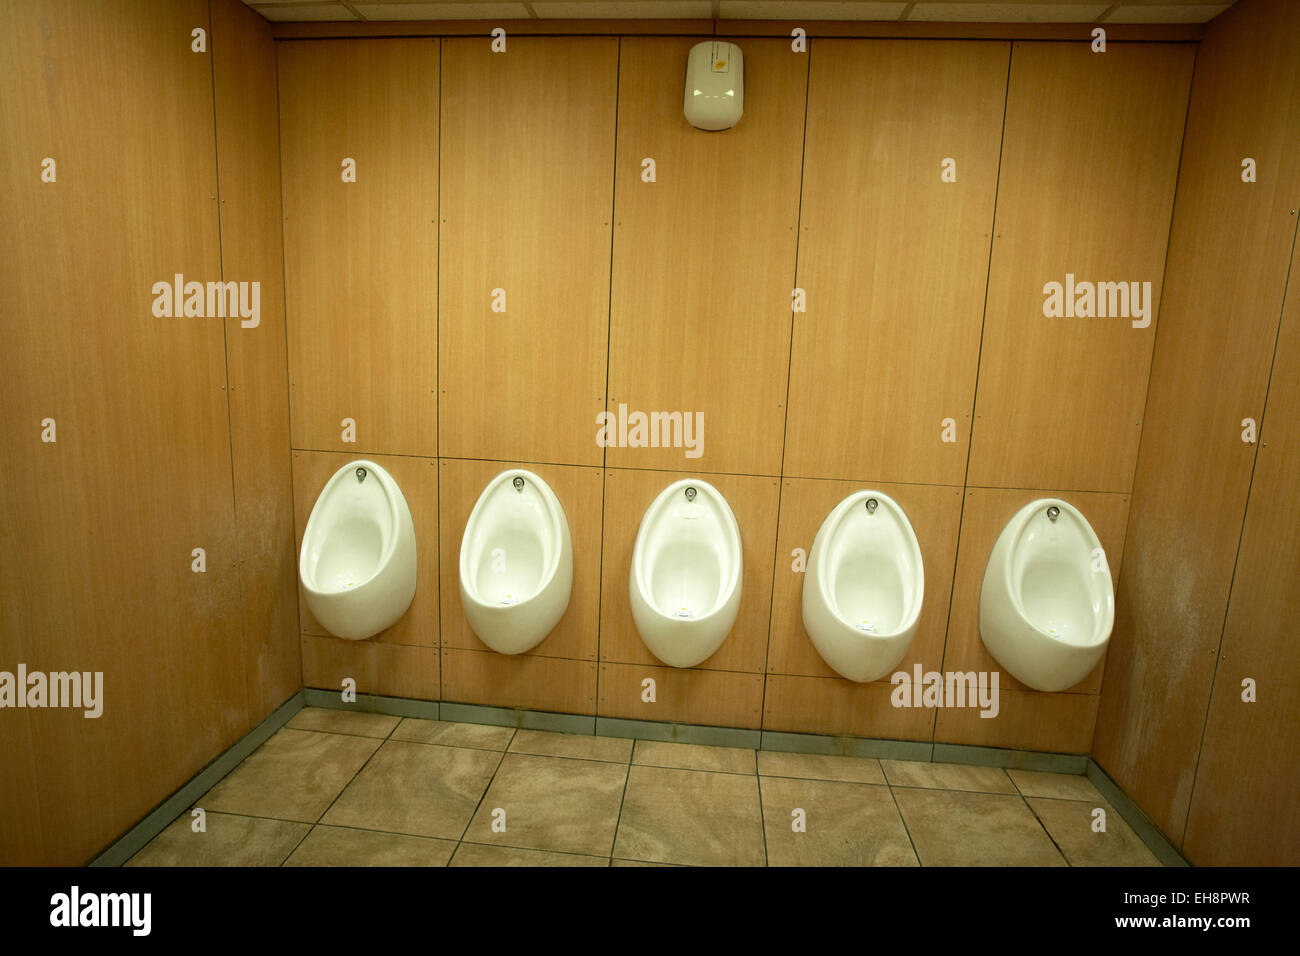 https://c8.alamy.com/comp/EH8PWR/five-white-urinals-in-a-men%60s-toilet-uk-EH8PWR.jpg